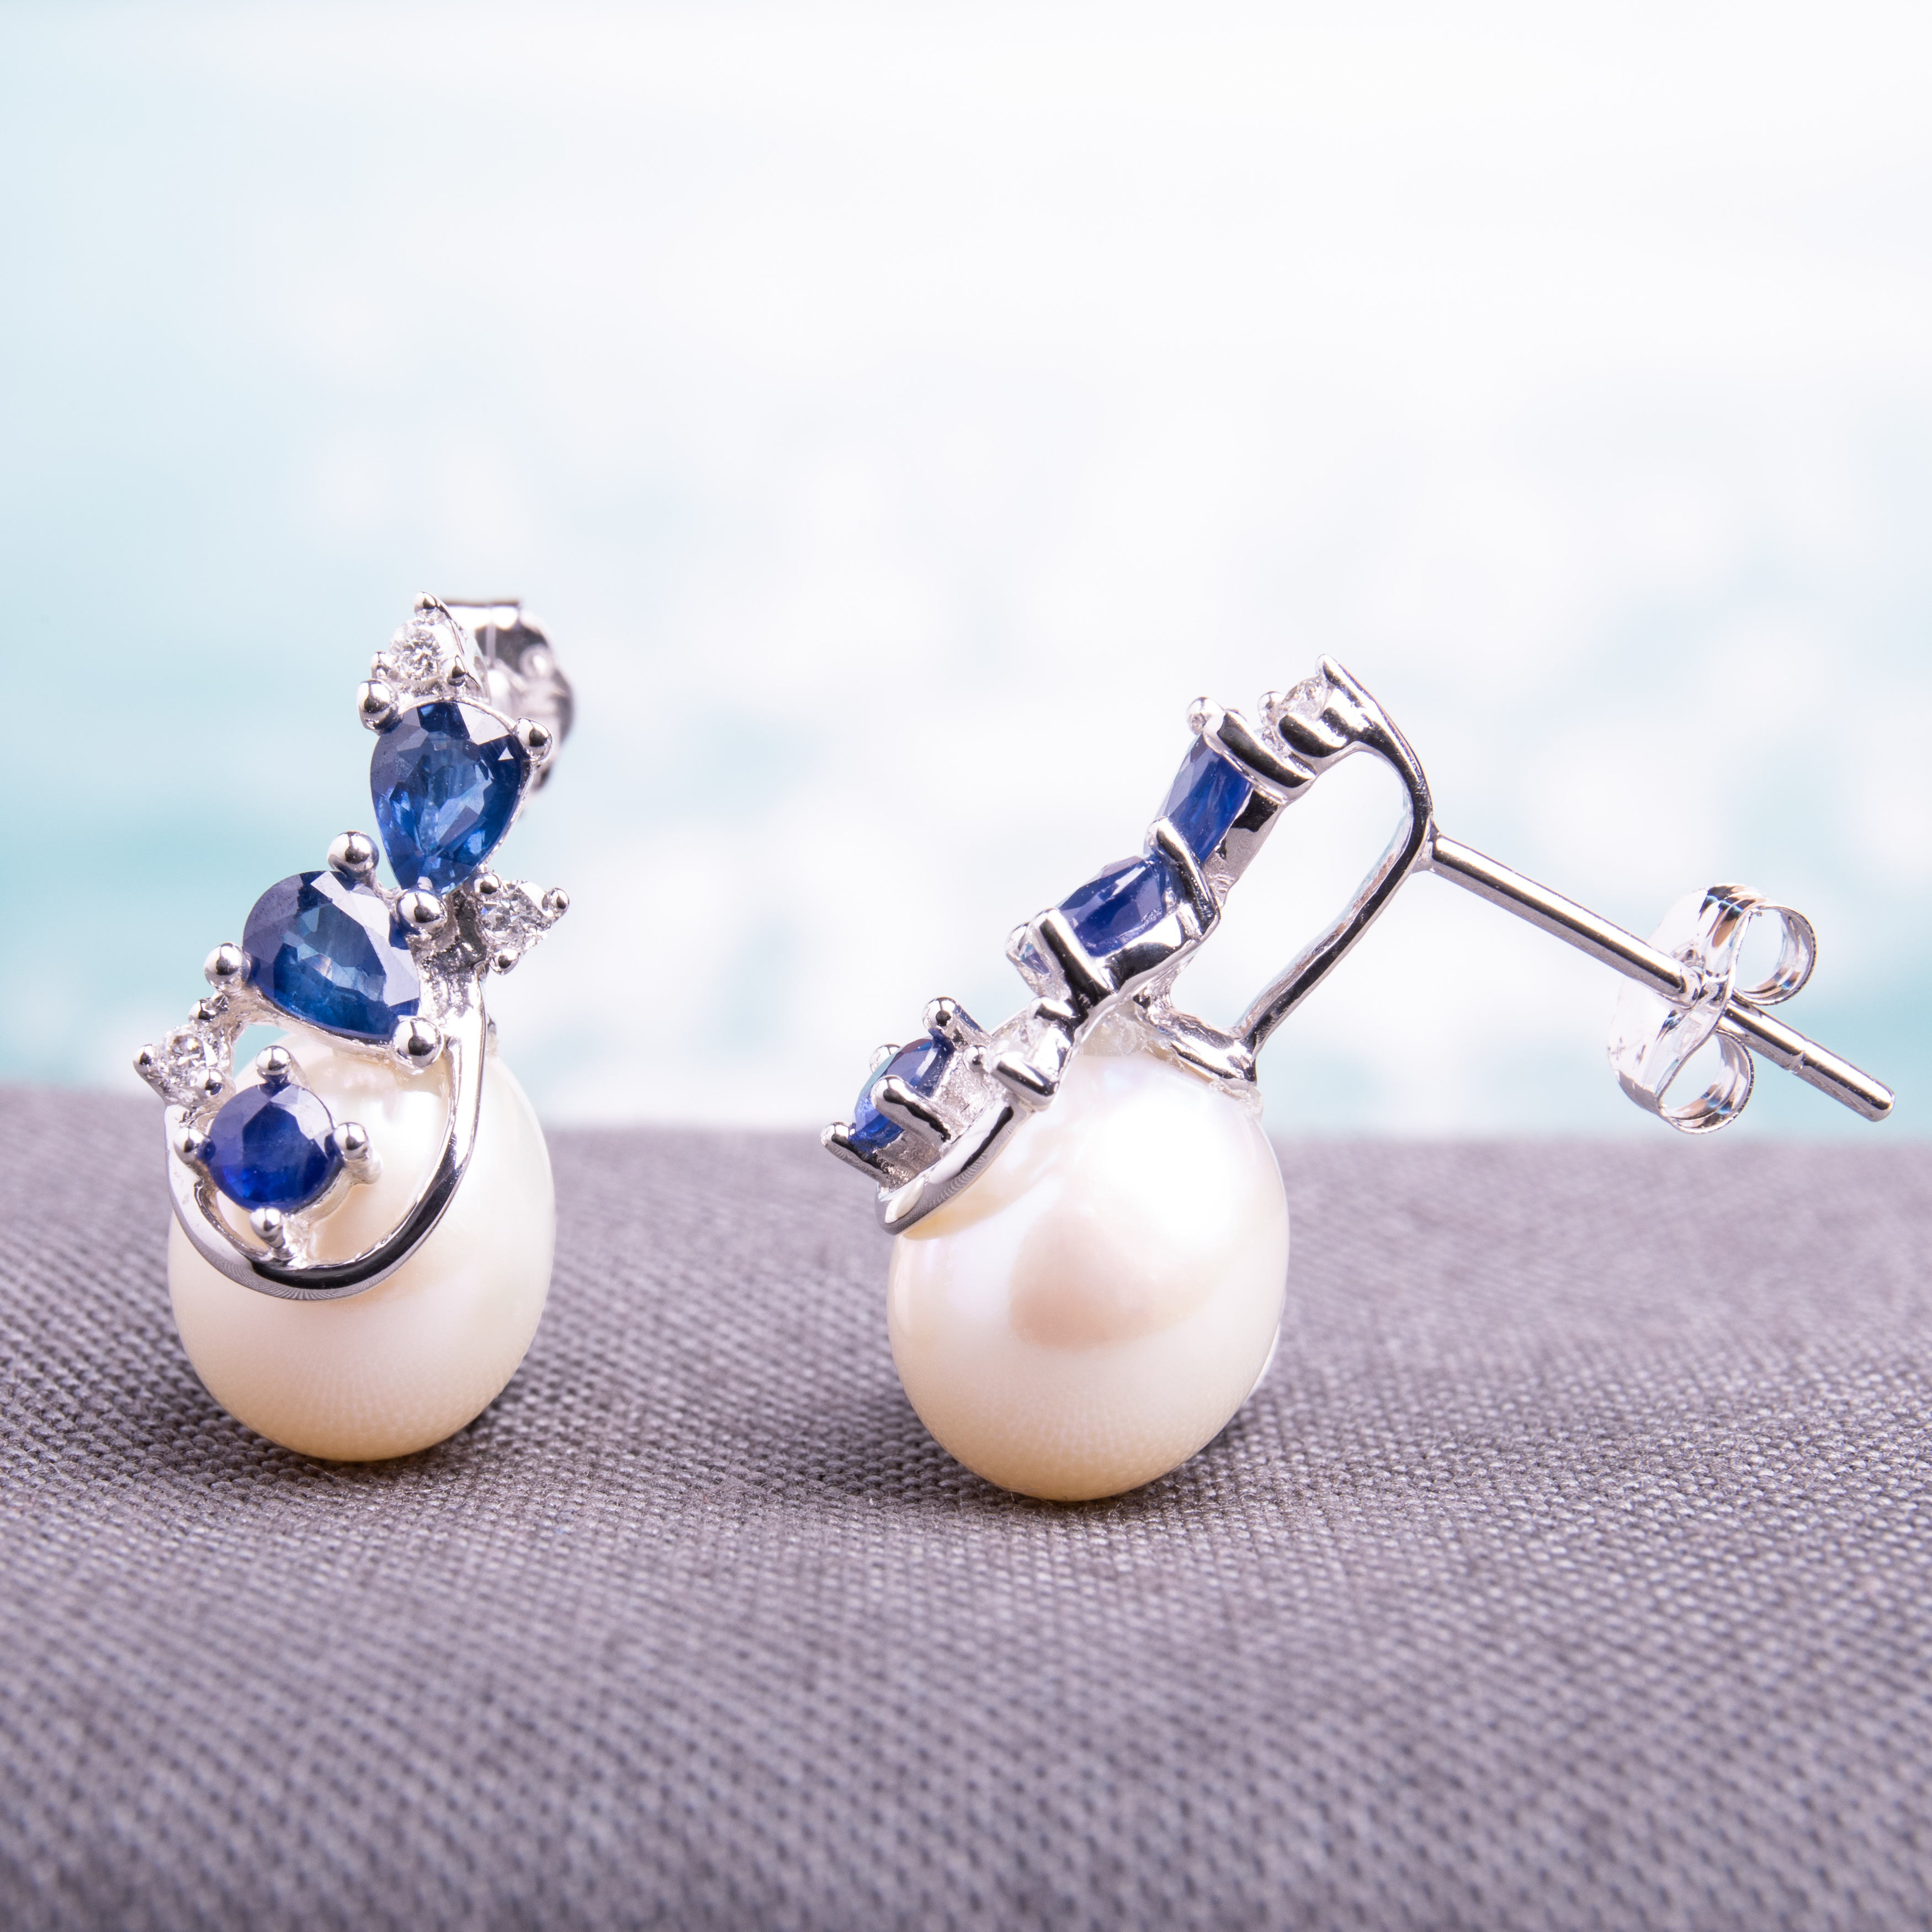 7.5 - 8 MM White Cultured Freshwater Pearl with Diamonds and Sapphire Earrings in 10k White Gold